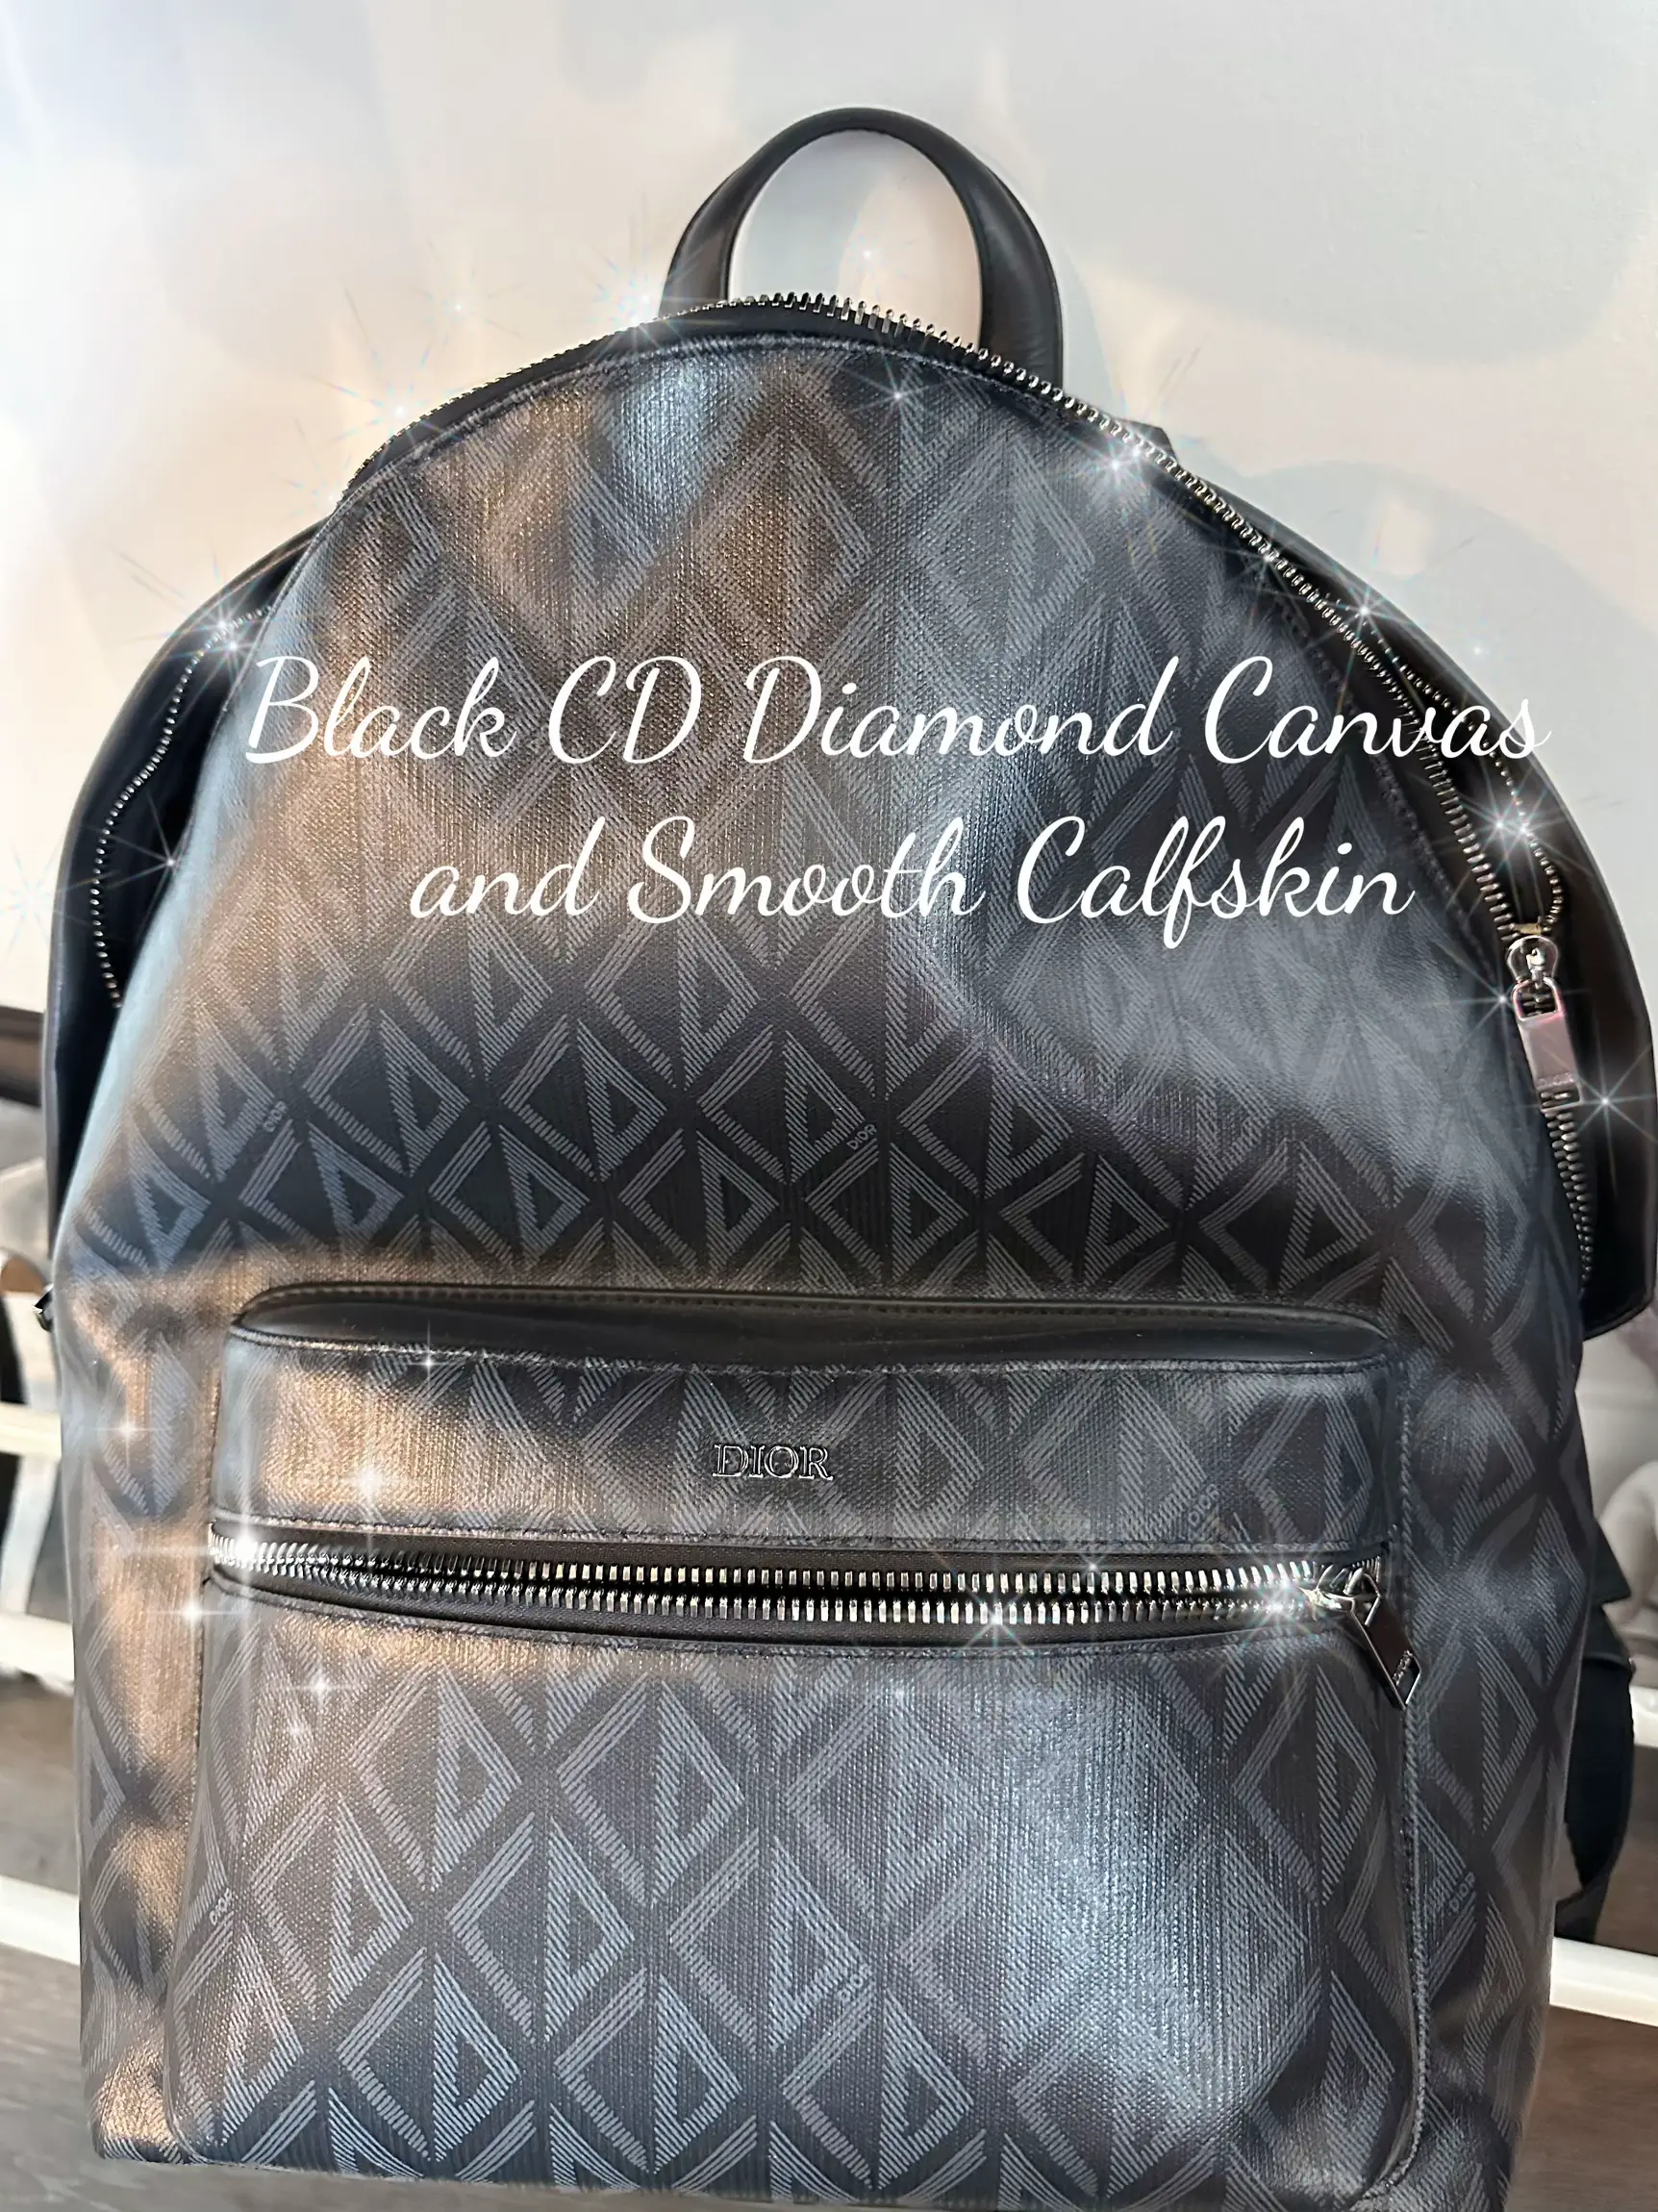 Rider Backpack Black CD Diamond Canvas and Smooth Calfskin